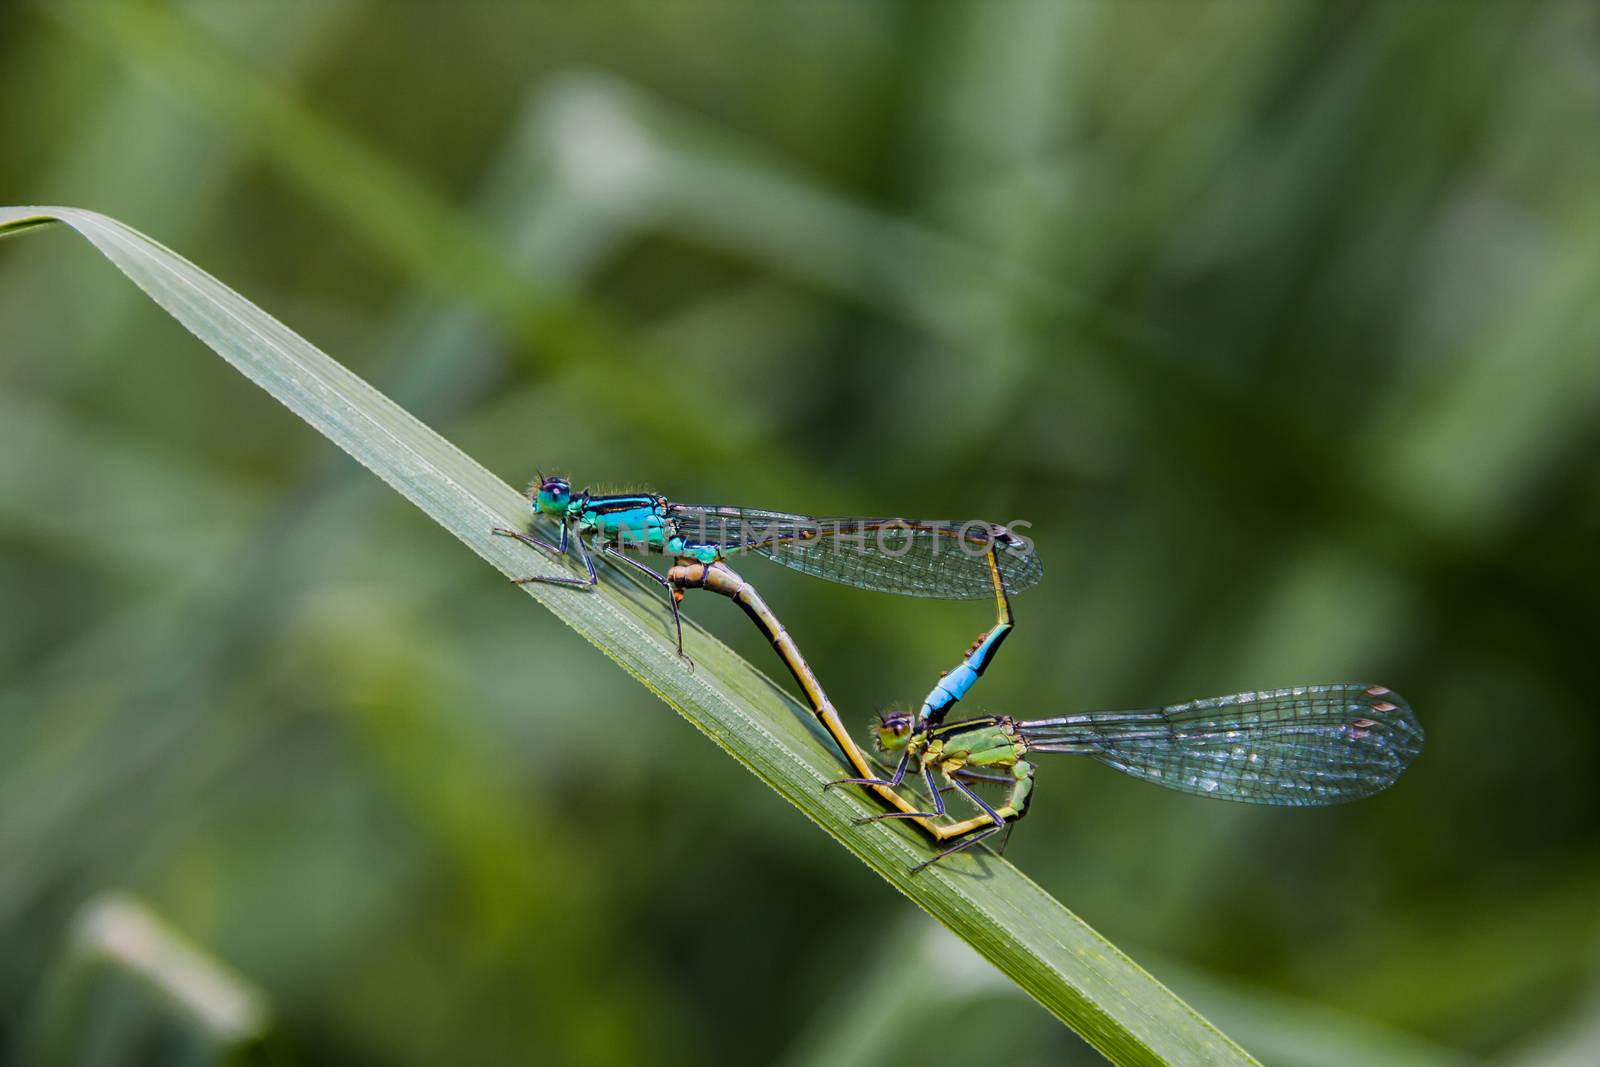 Two Dragonfly sex by rainfallsup